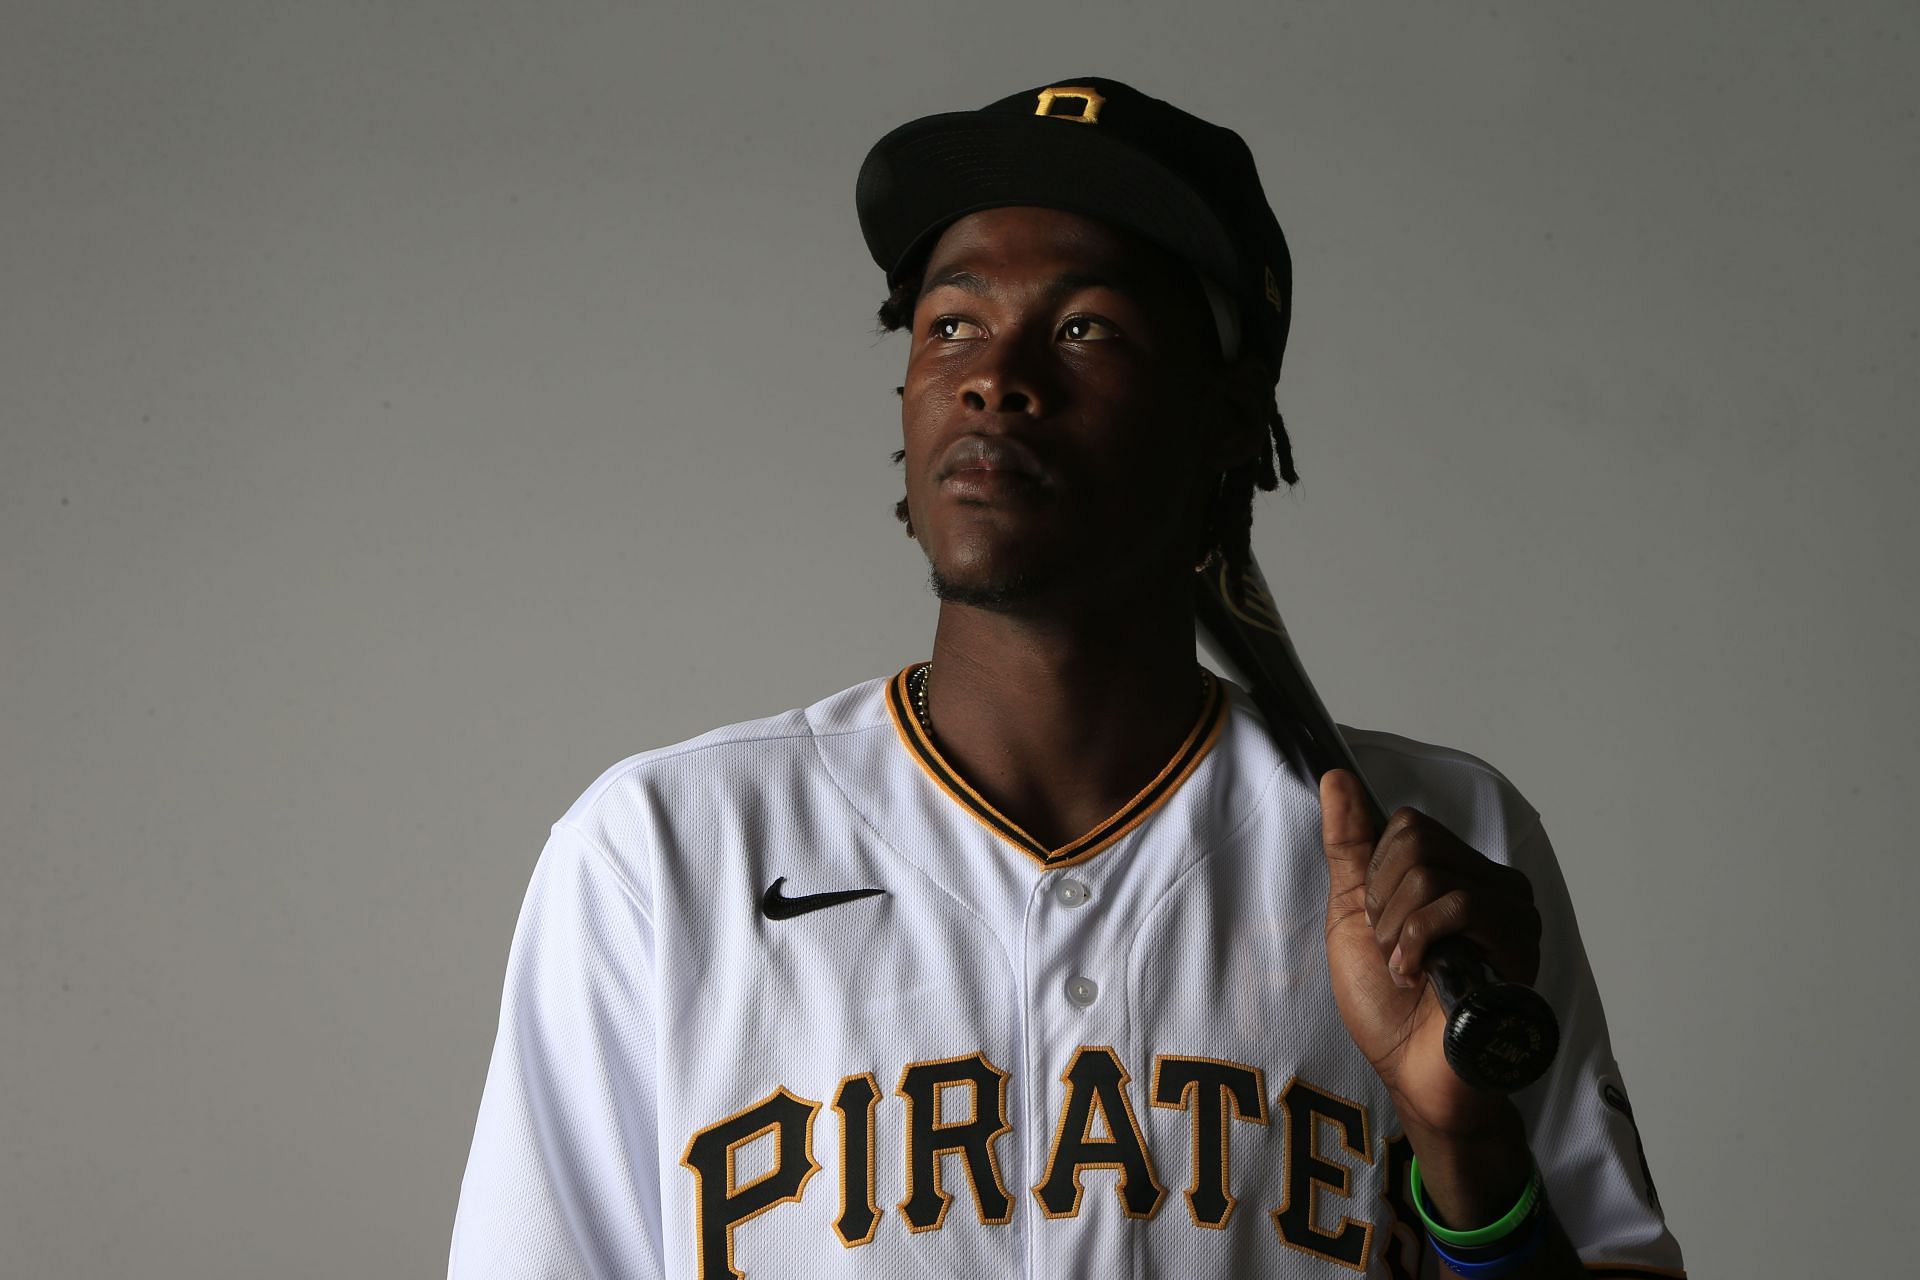 Watch: Pittsburgh Pirates 6' 7” shortstop Oneil Cruz records hardest throw  by an infielder this season in just his first Major League game